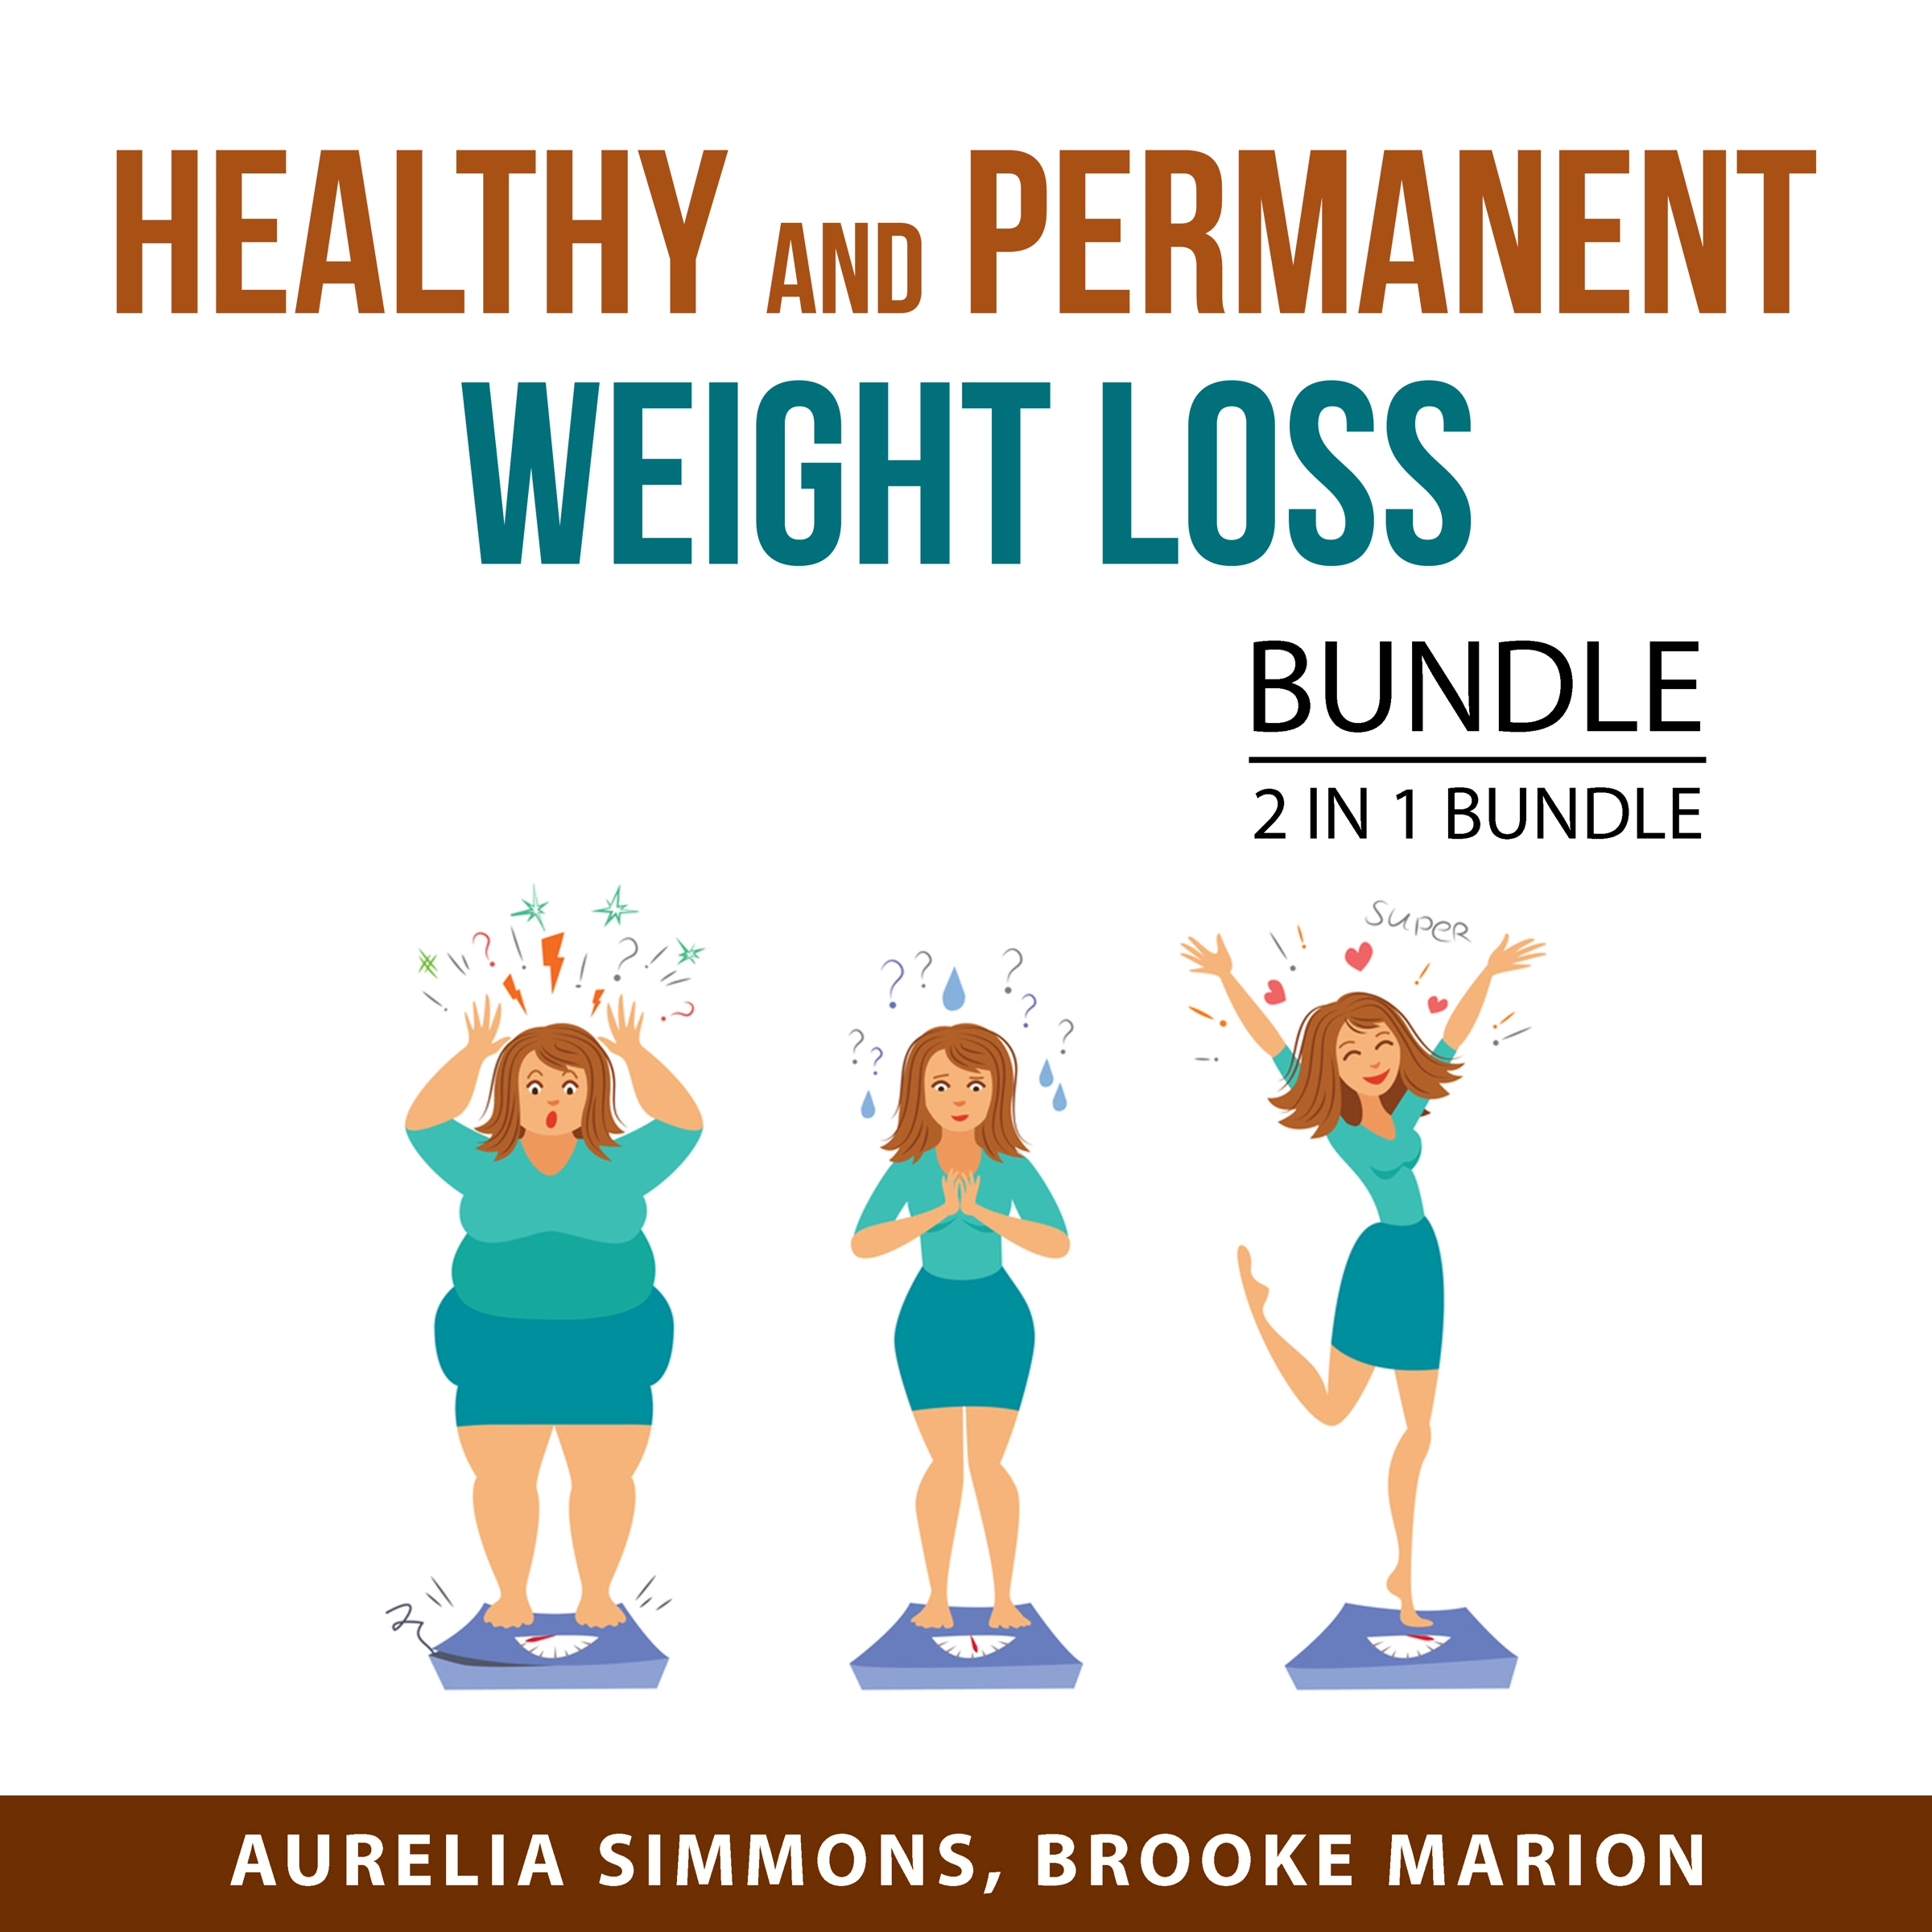 Healthy and Permanent Weight Loss Bundle, 2 in 1 Bundle Audiobook by Aurelia Simmons